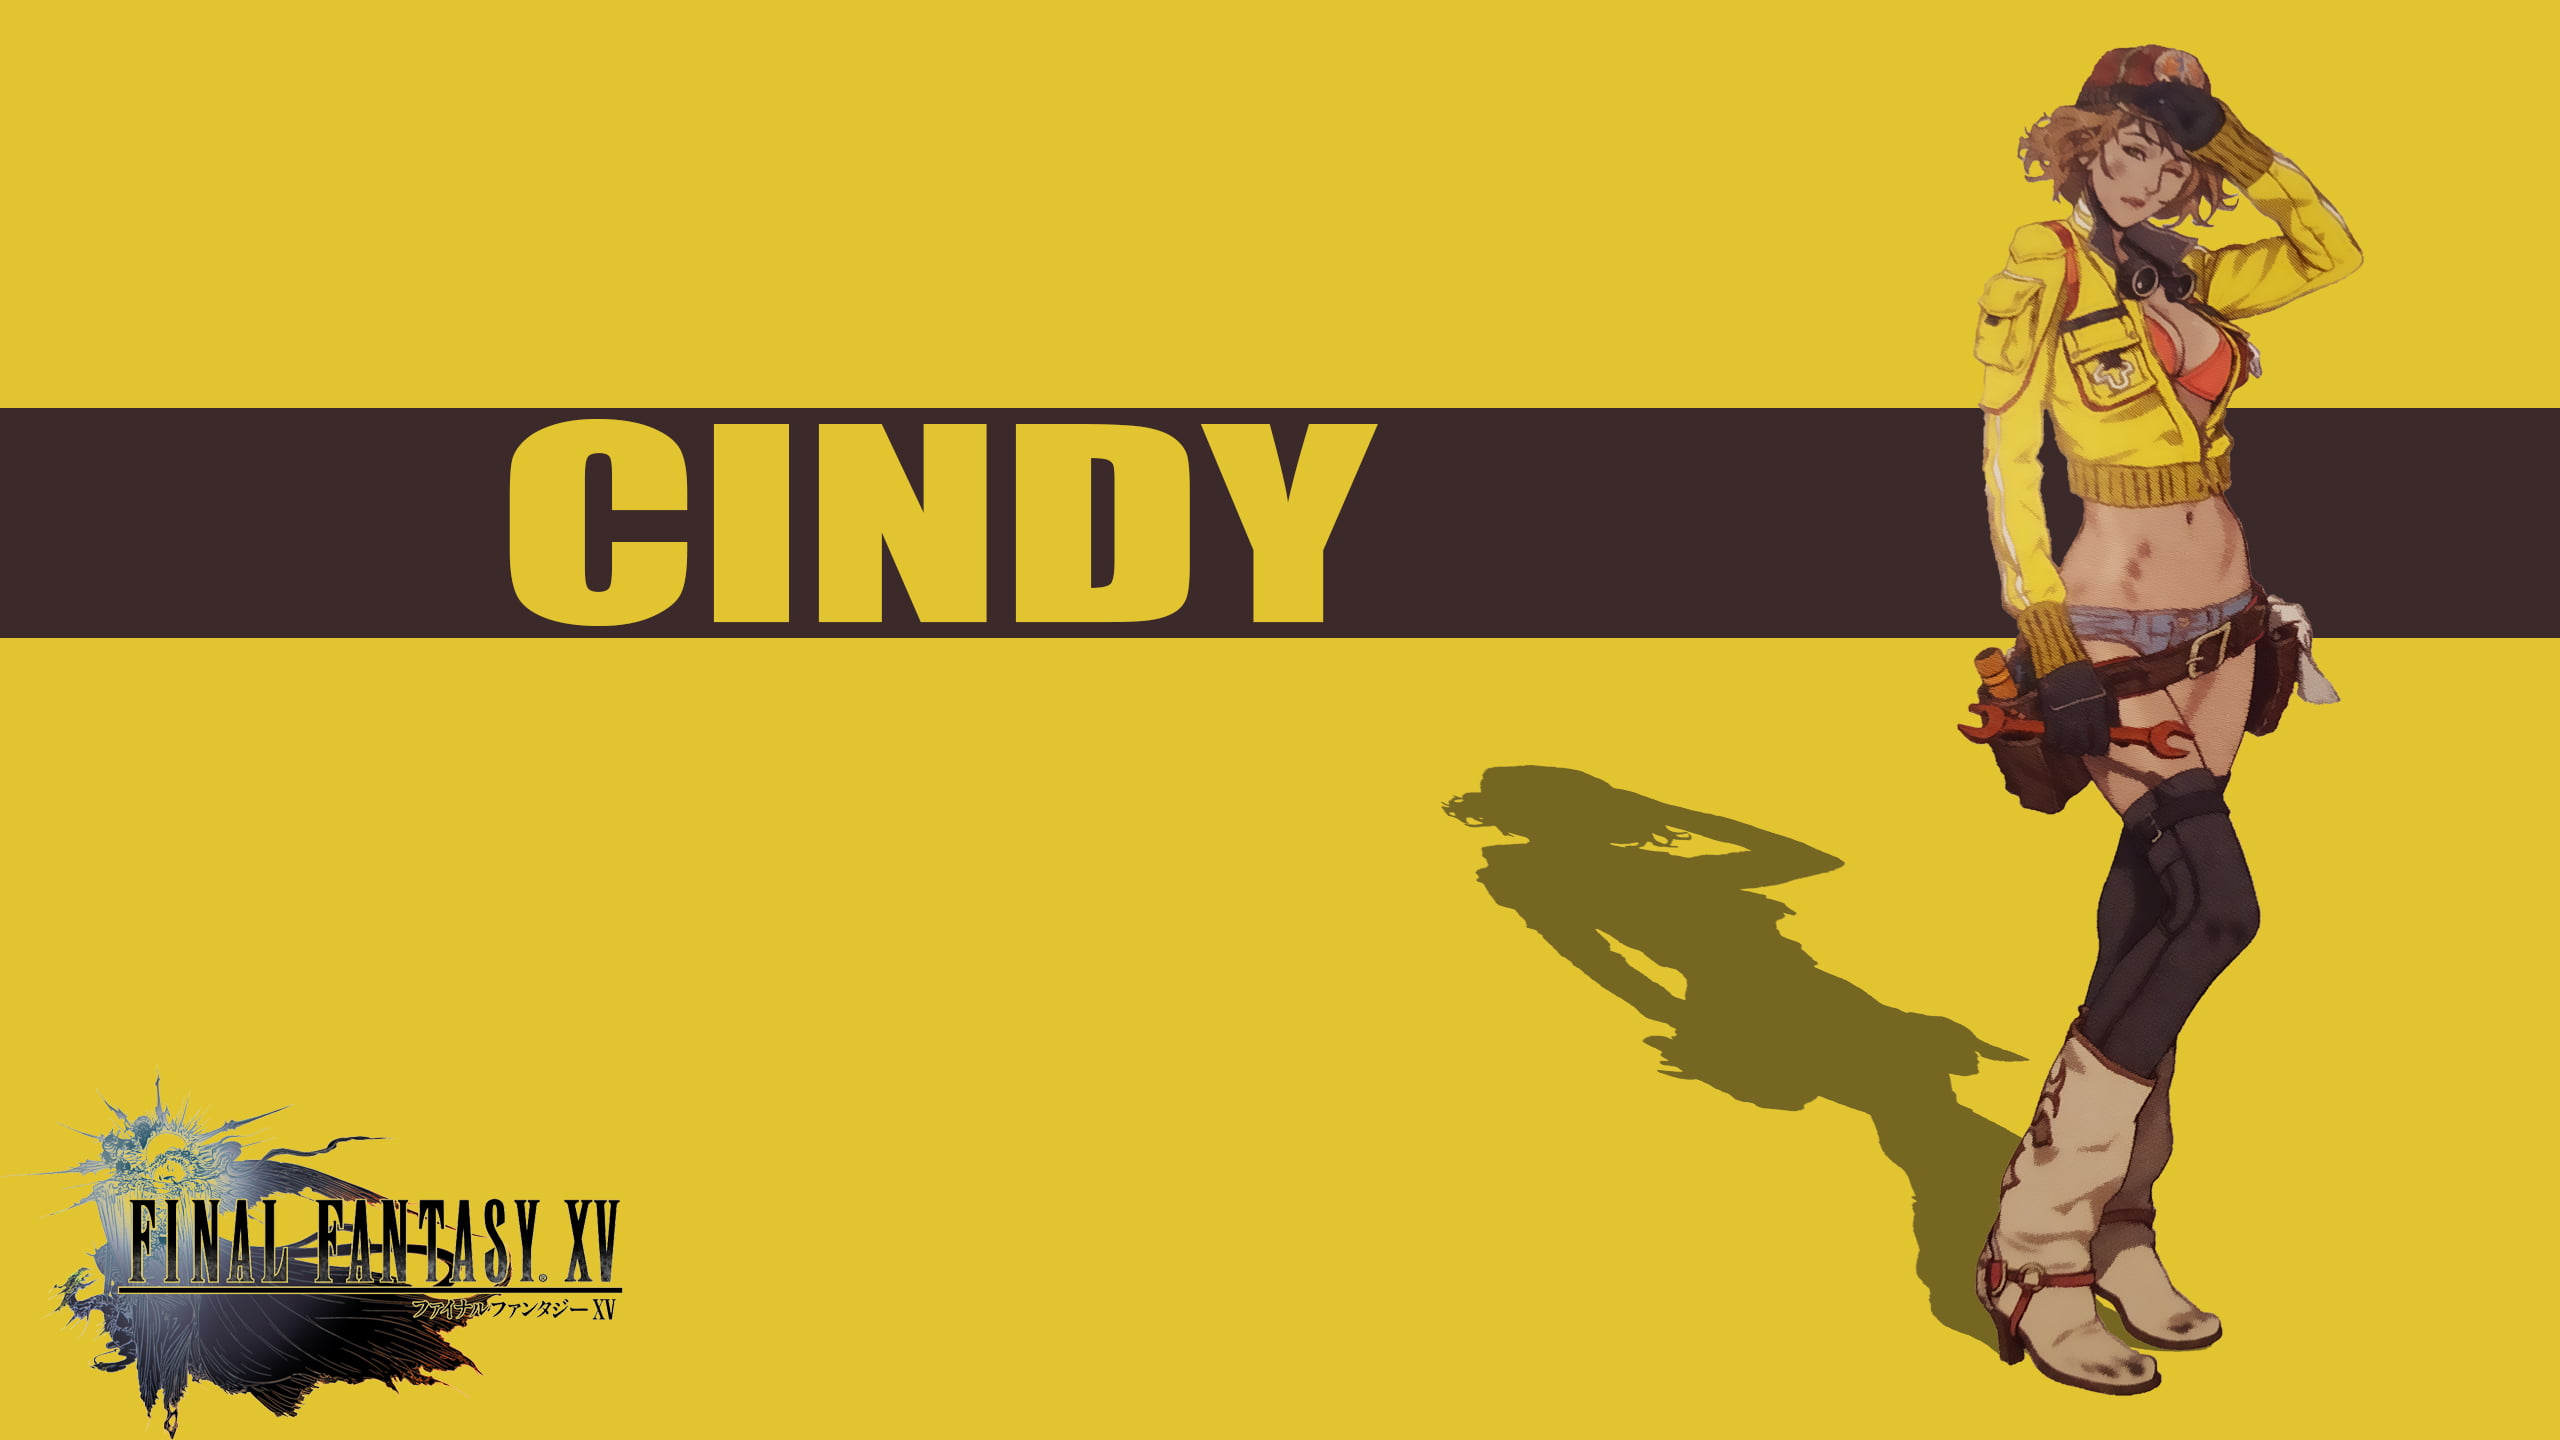 Cindy from Final Fantasy